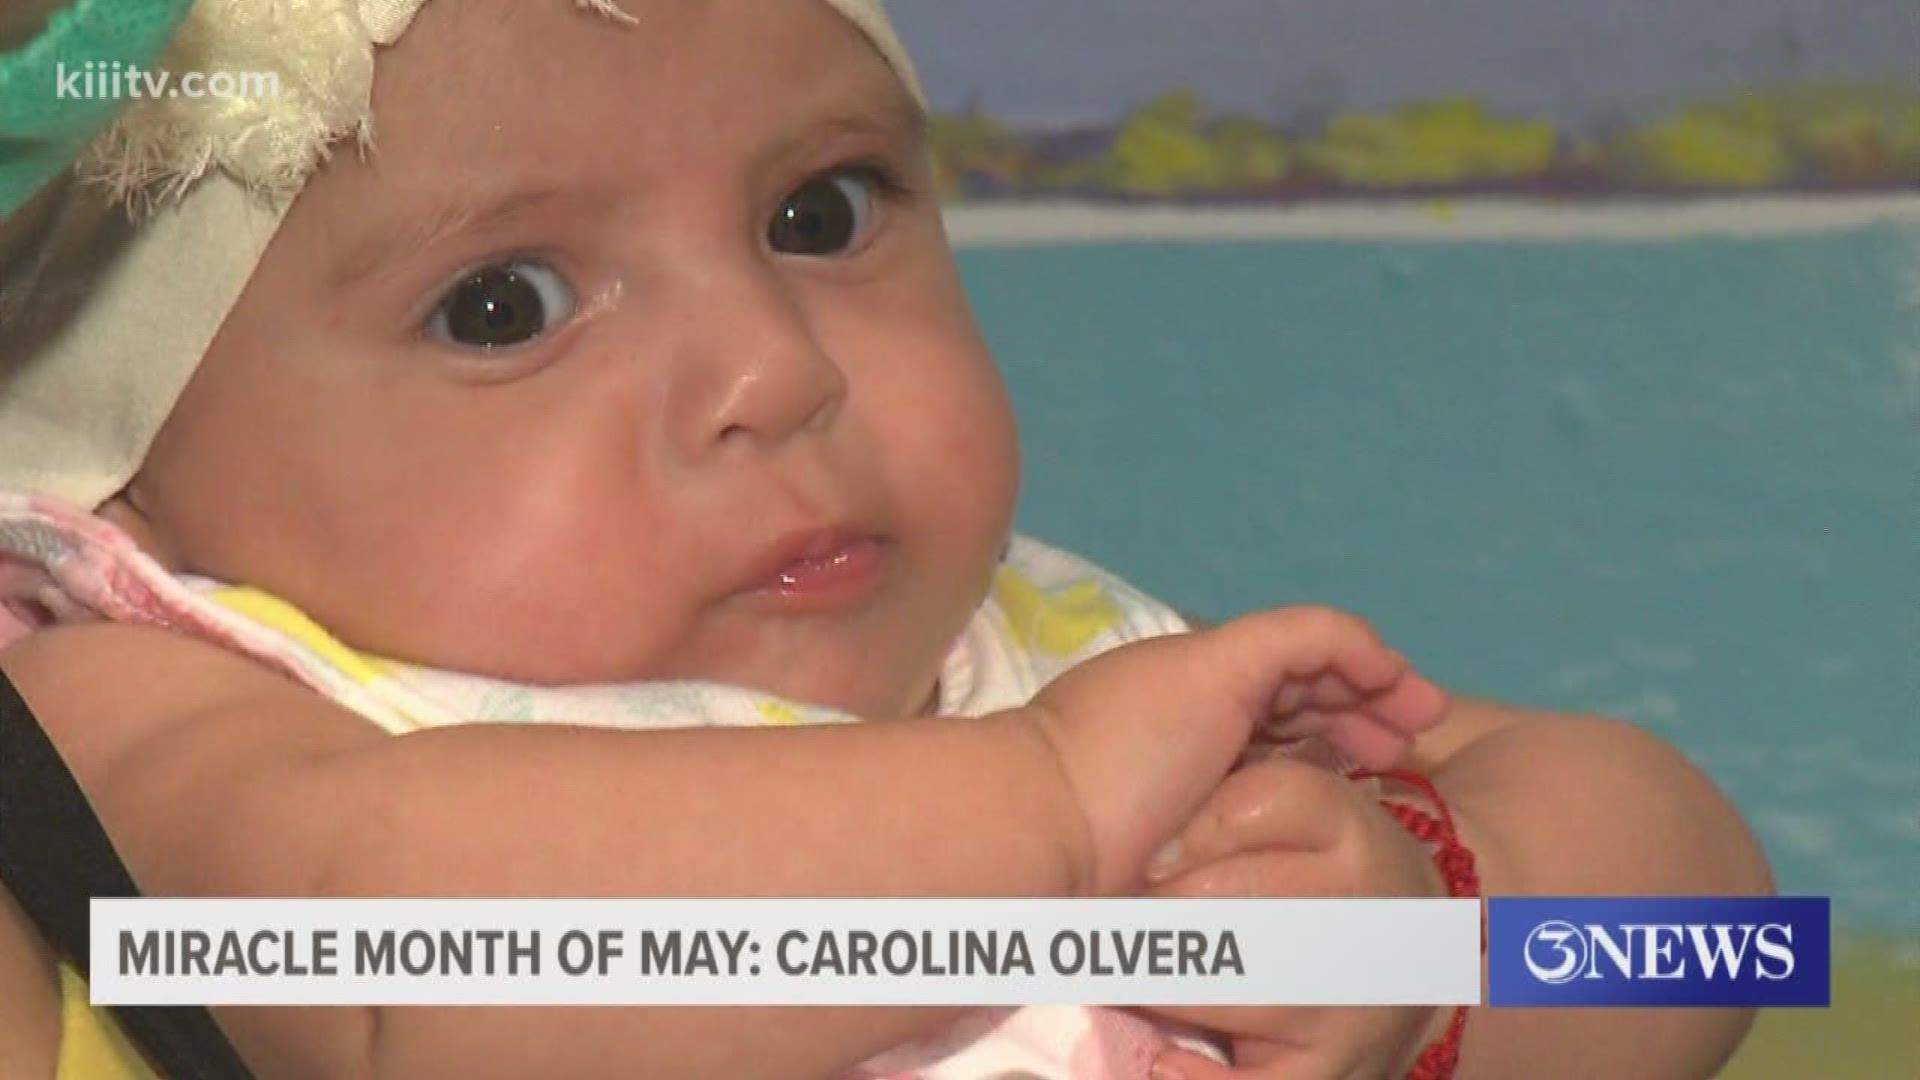 Before Carolina Olvera was born prematurely at nearly 20 weeks, doctors discovered two holes in her heart at a routine sonogram.